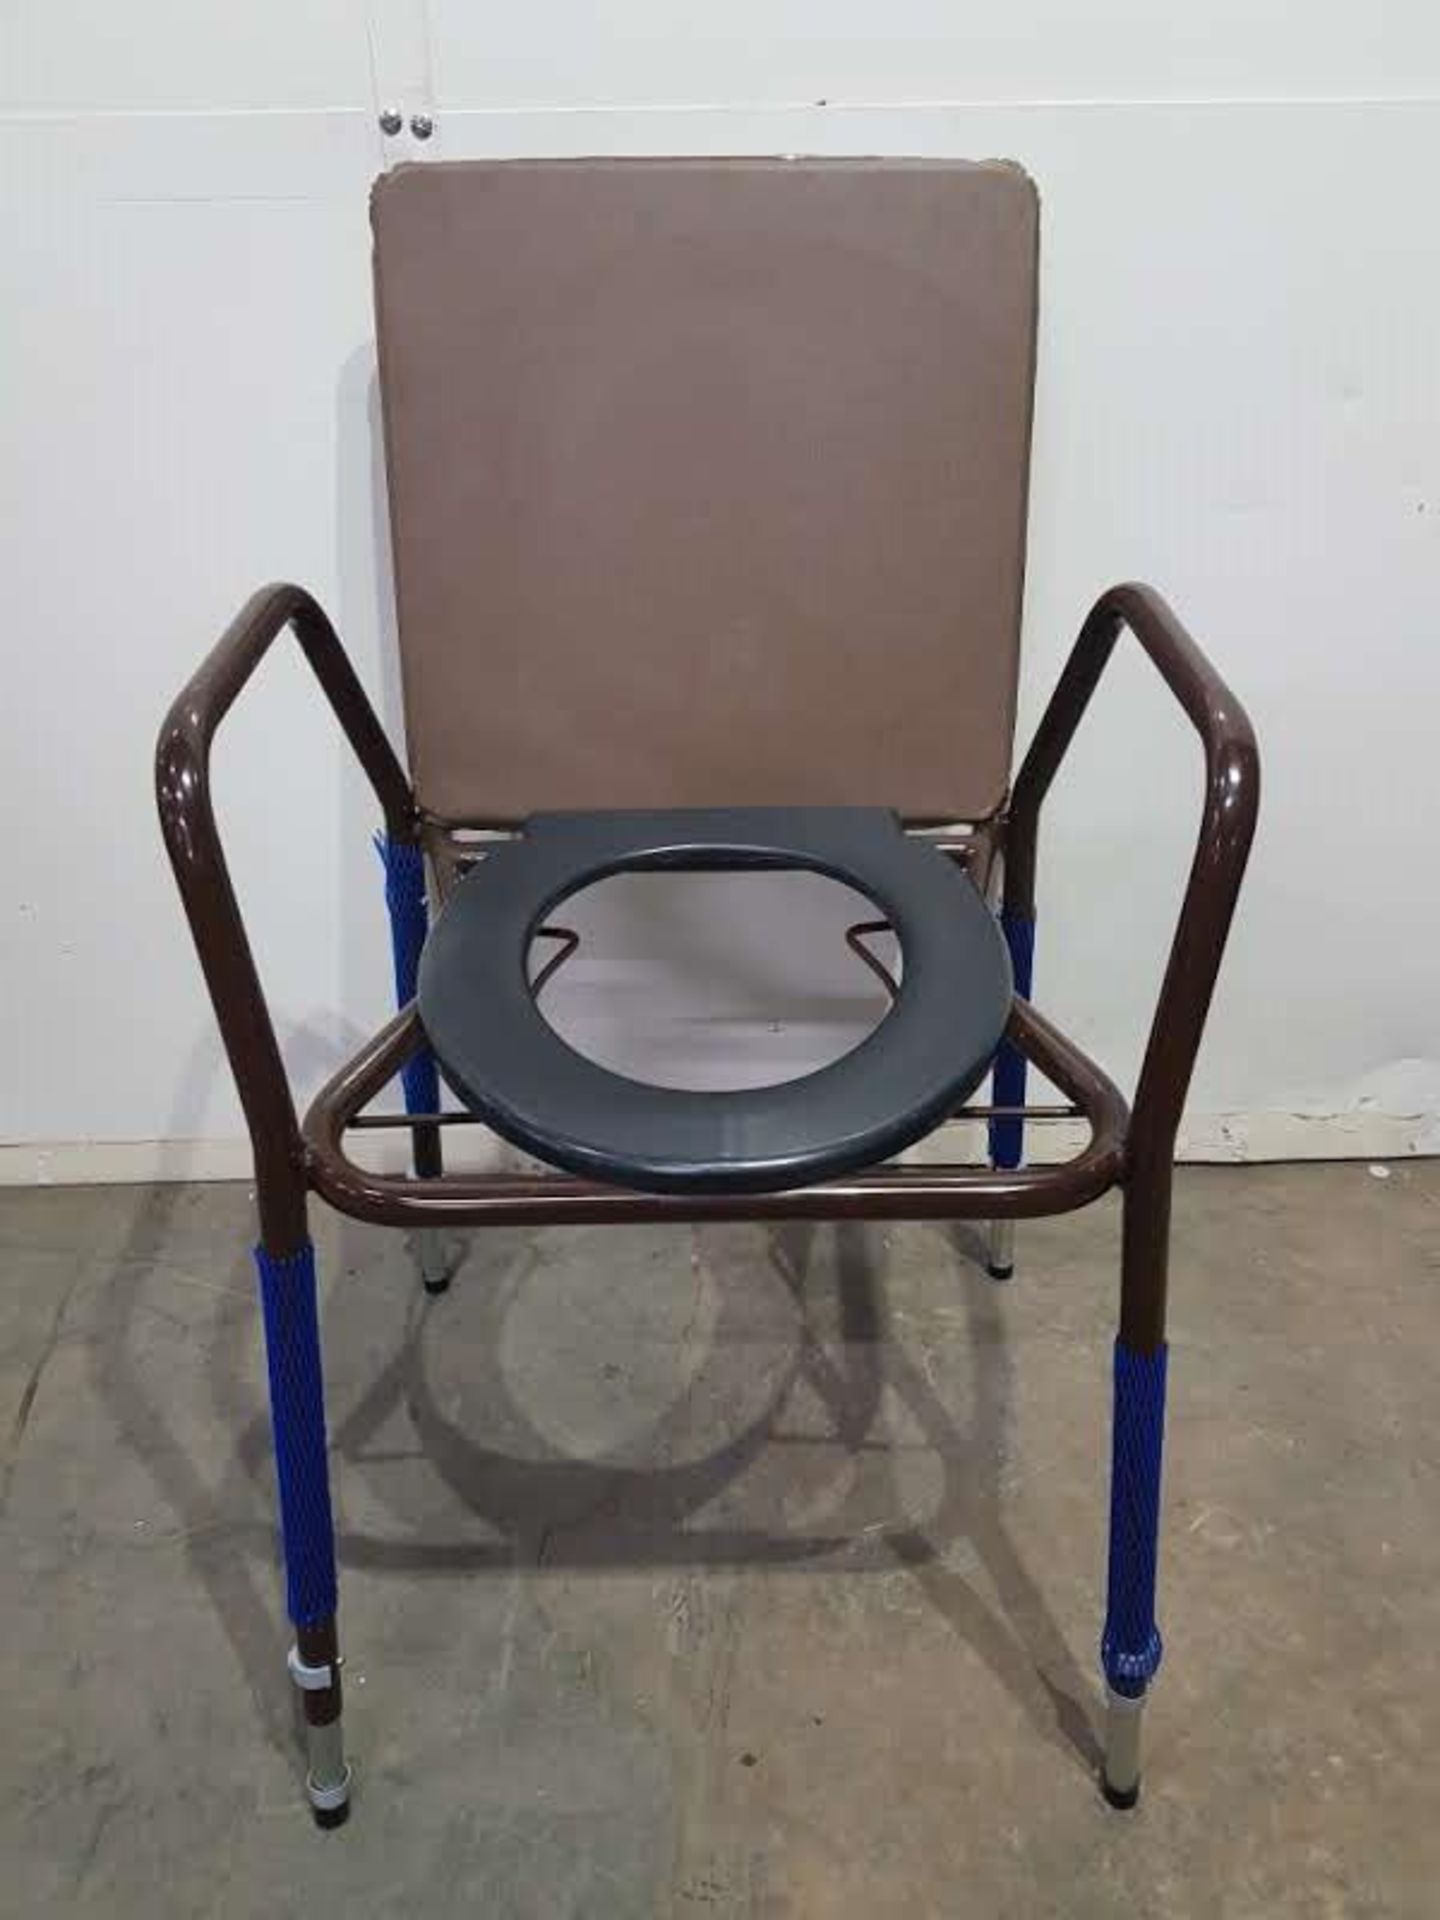 Cefindy Toilet Chair Height Adjustable - Image 2 of 5